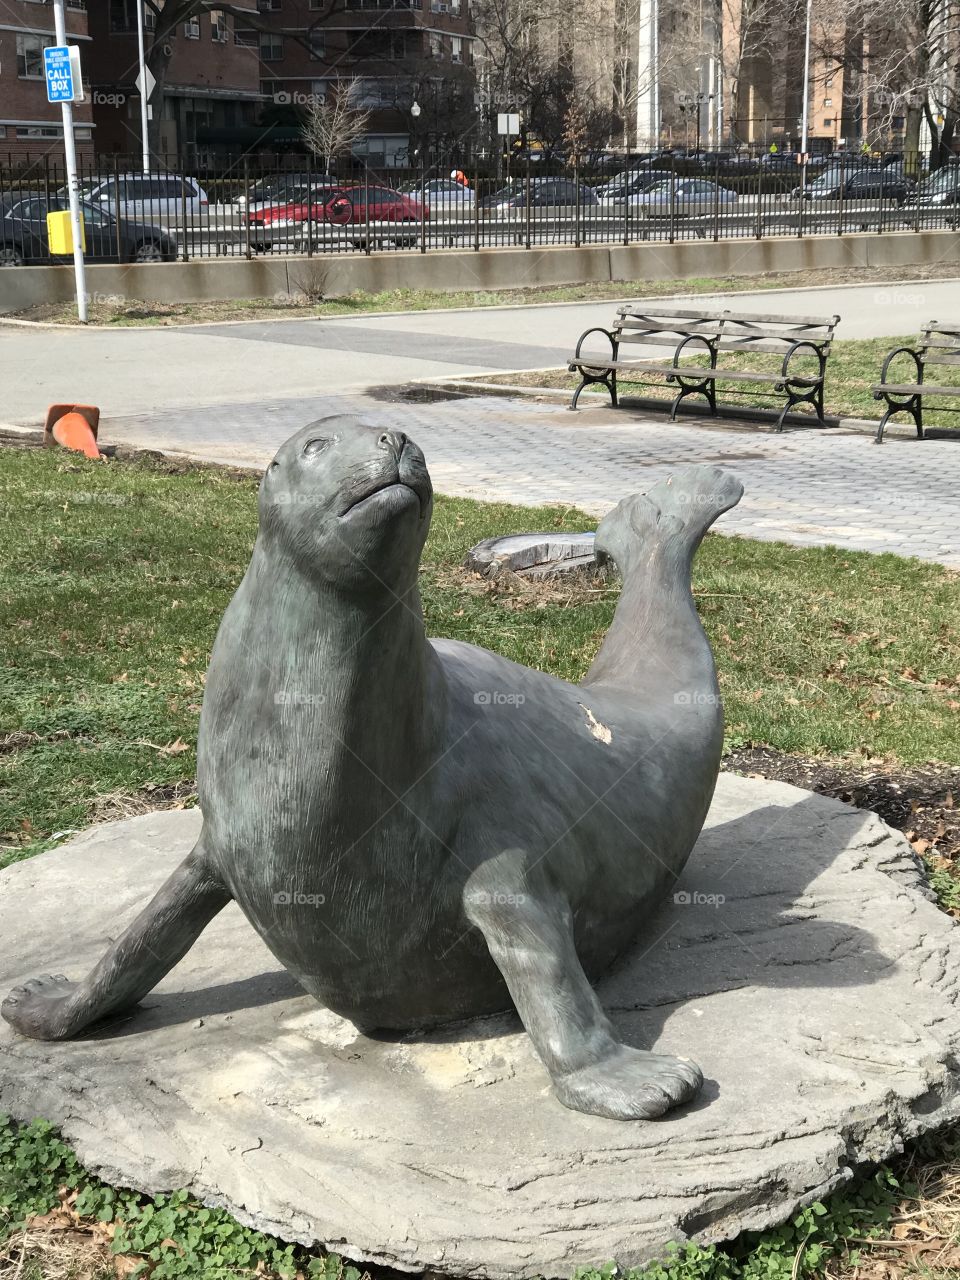 Seal in East River Park NYC